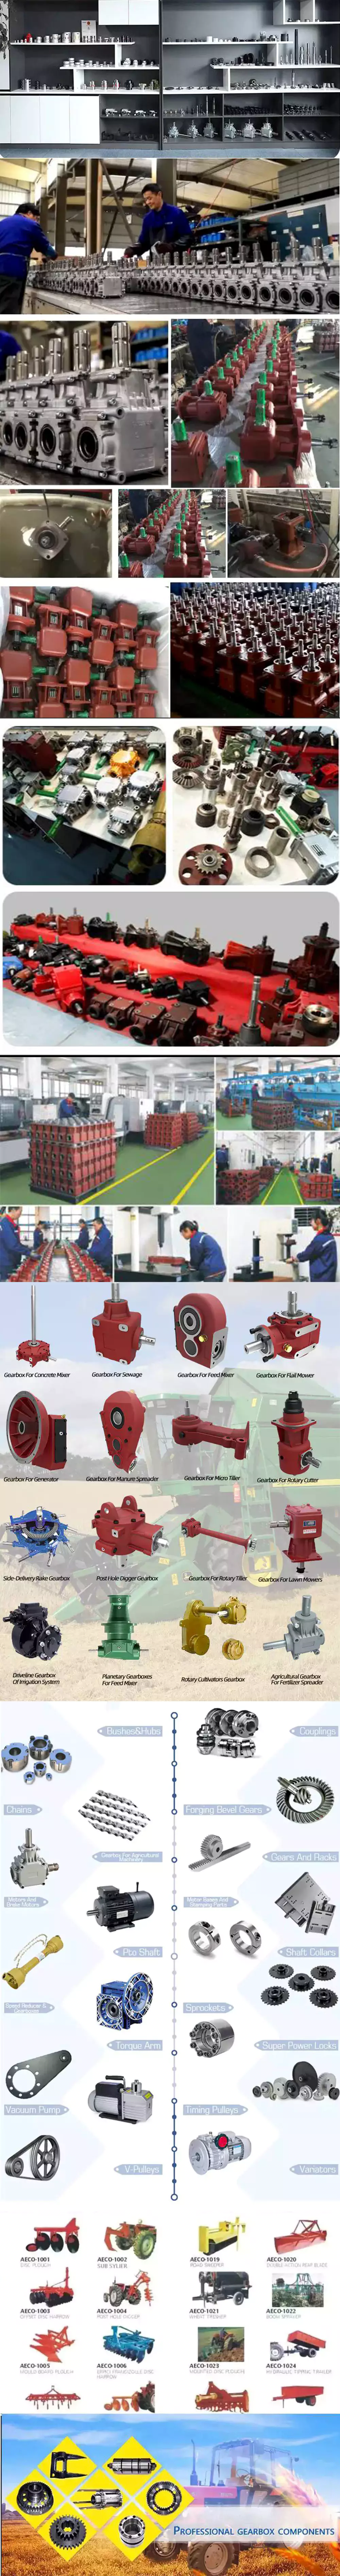 China wholesaler Basic Customization Hot Sale Agricultural 90 Degree Farm Pto Right Angle Gearbox for Tractor Slasher Rotary Tiller PGA Feeder Mixer Earth Auger   wholesaler 